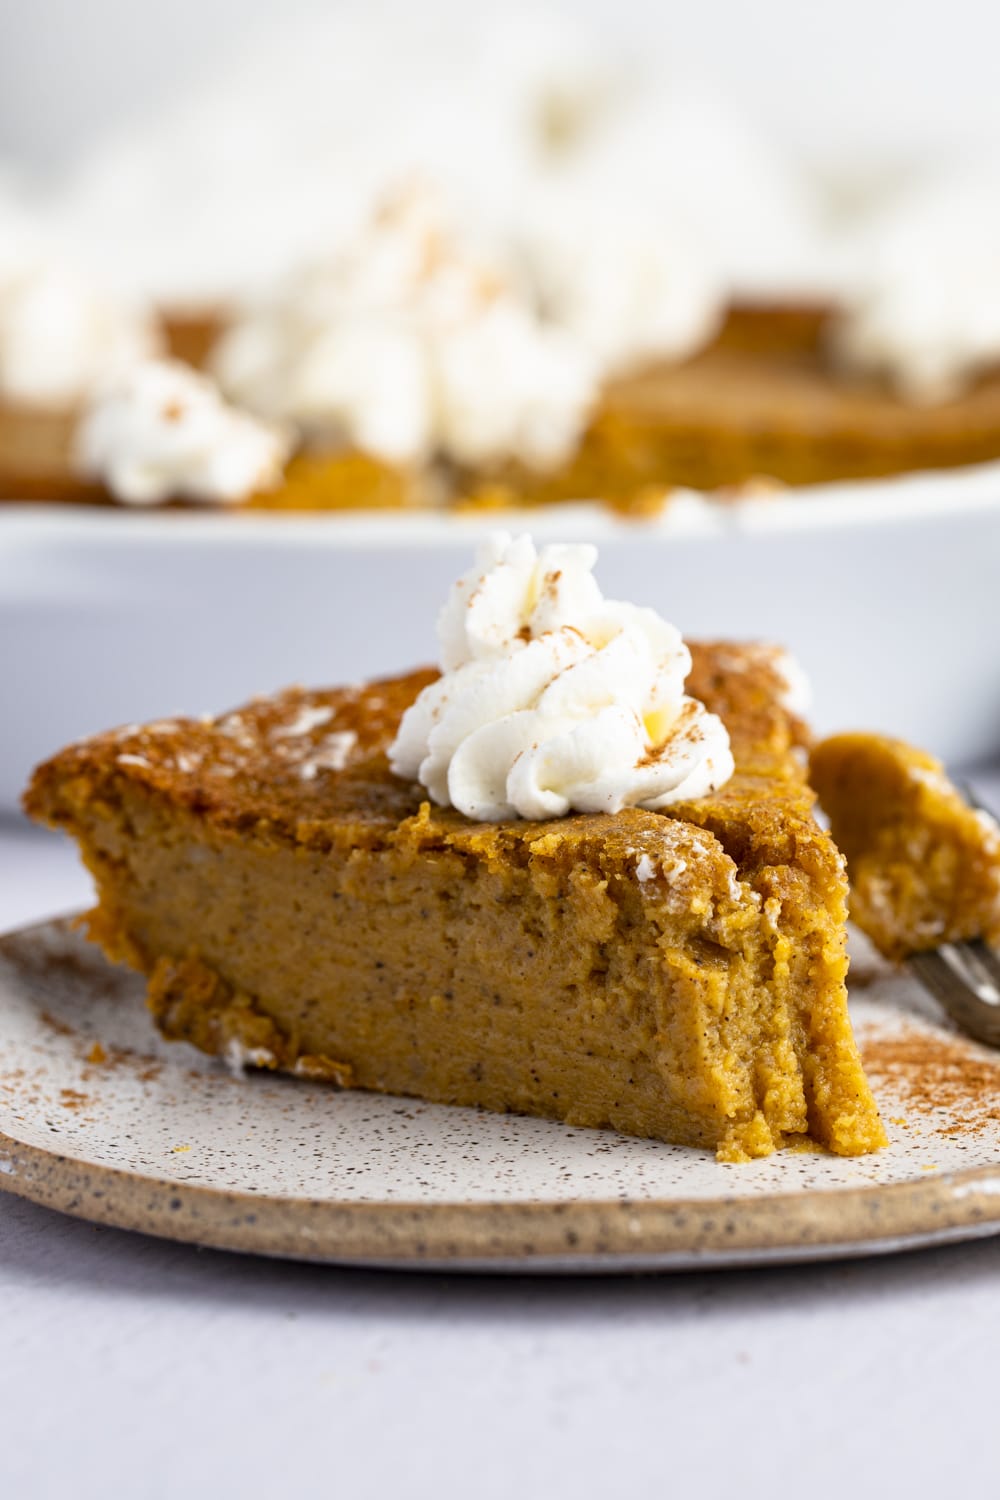 A slice of pumpkin pie with whip cream on top.